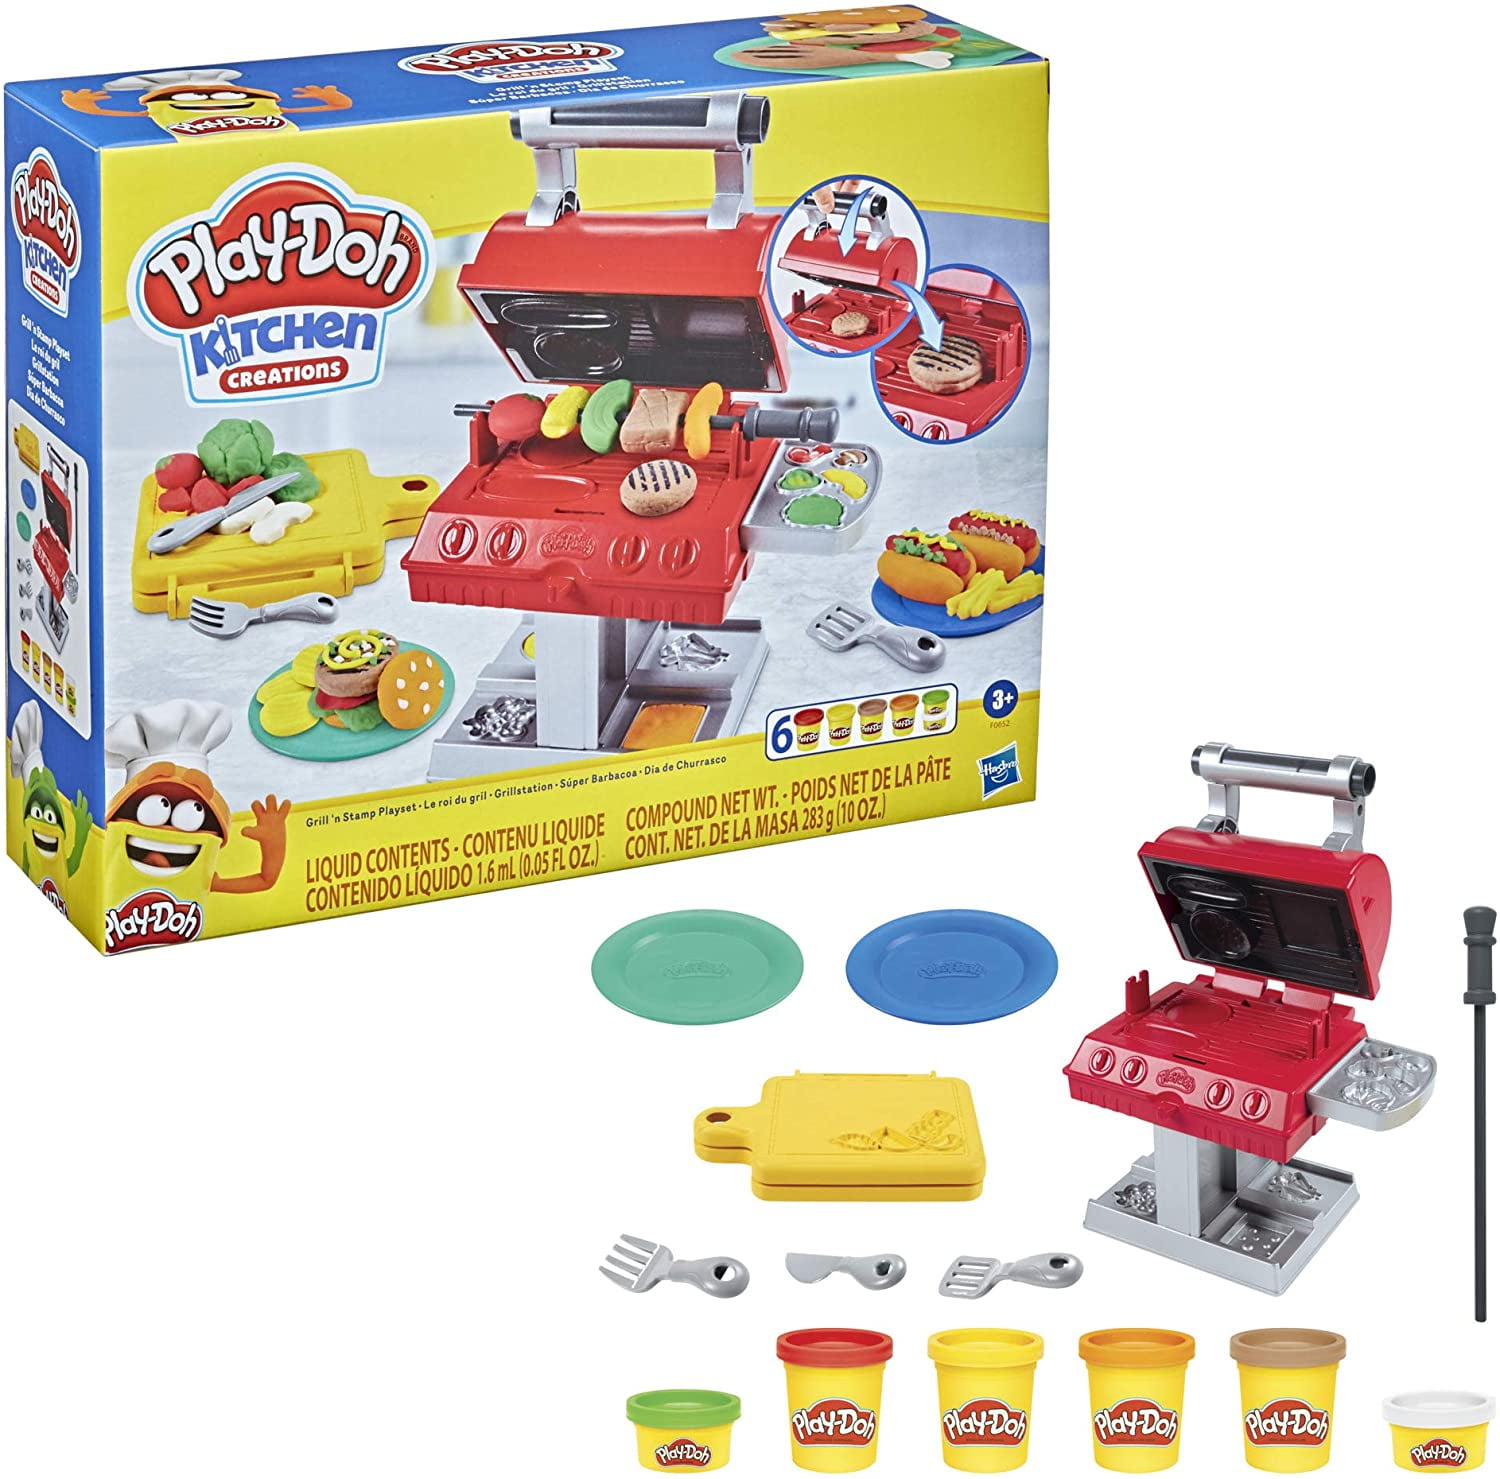 Play-Doh Kitchen Creations Ultimate Barbeque Set - Sam's Club